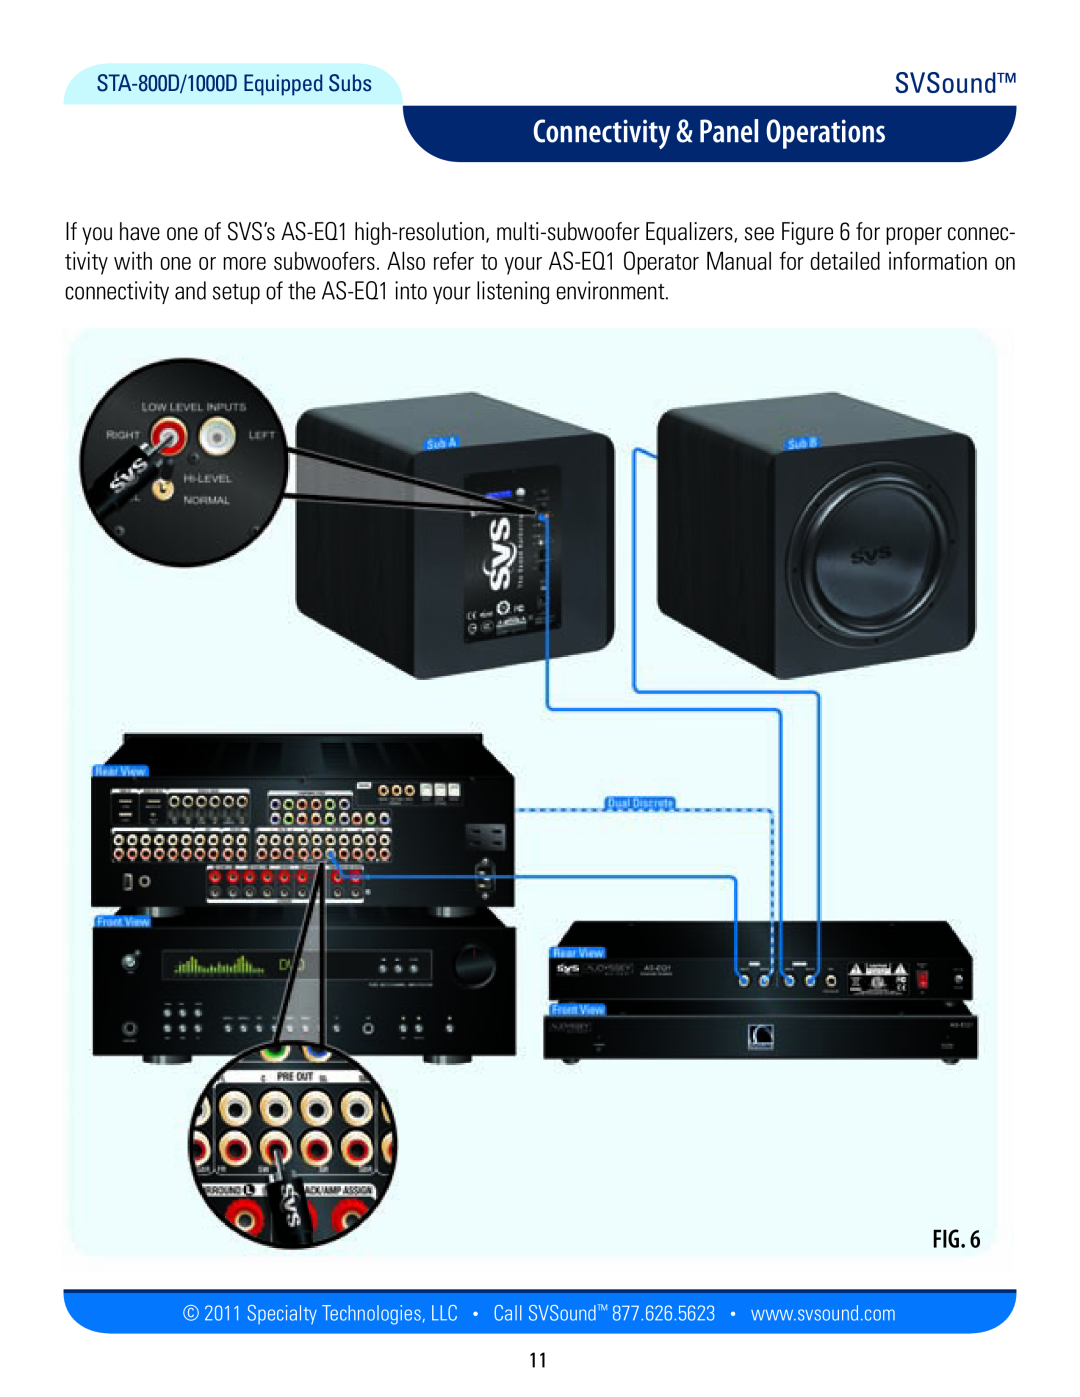 SV Sound PC13-Ultra, PB12-Plus, PC12-Plus manual Connectivity & Panel Operations, Fig, SVSound, STA-800D/1000DEquipped Subs 